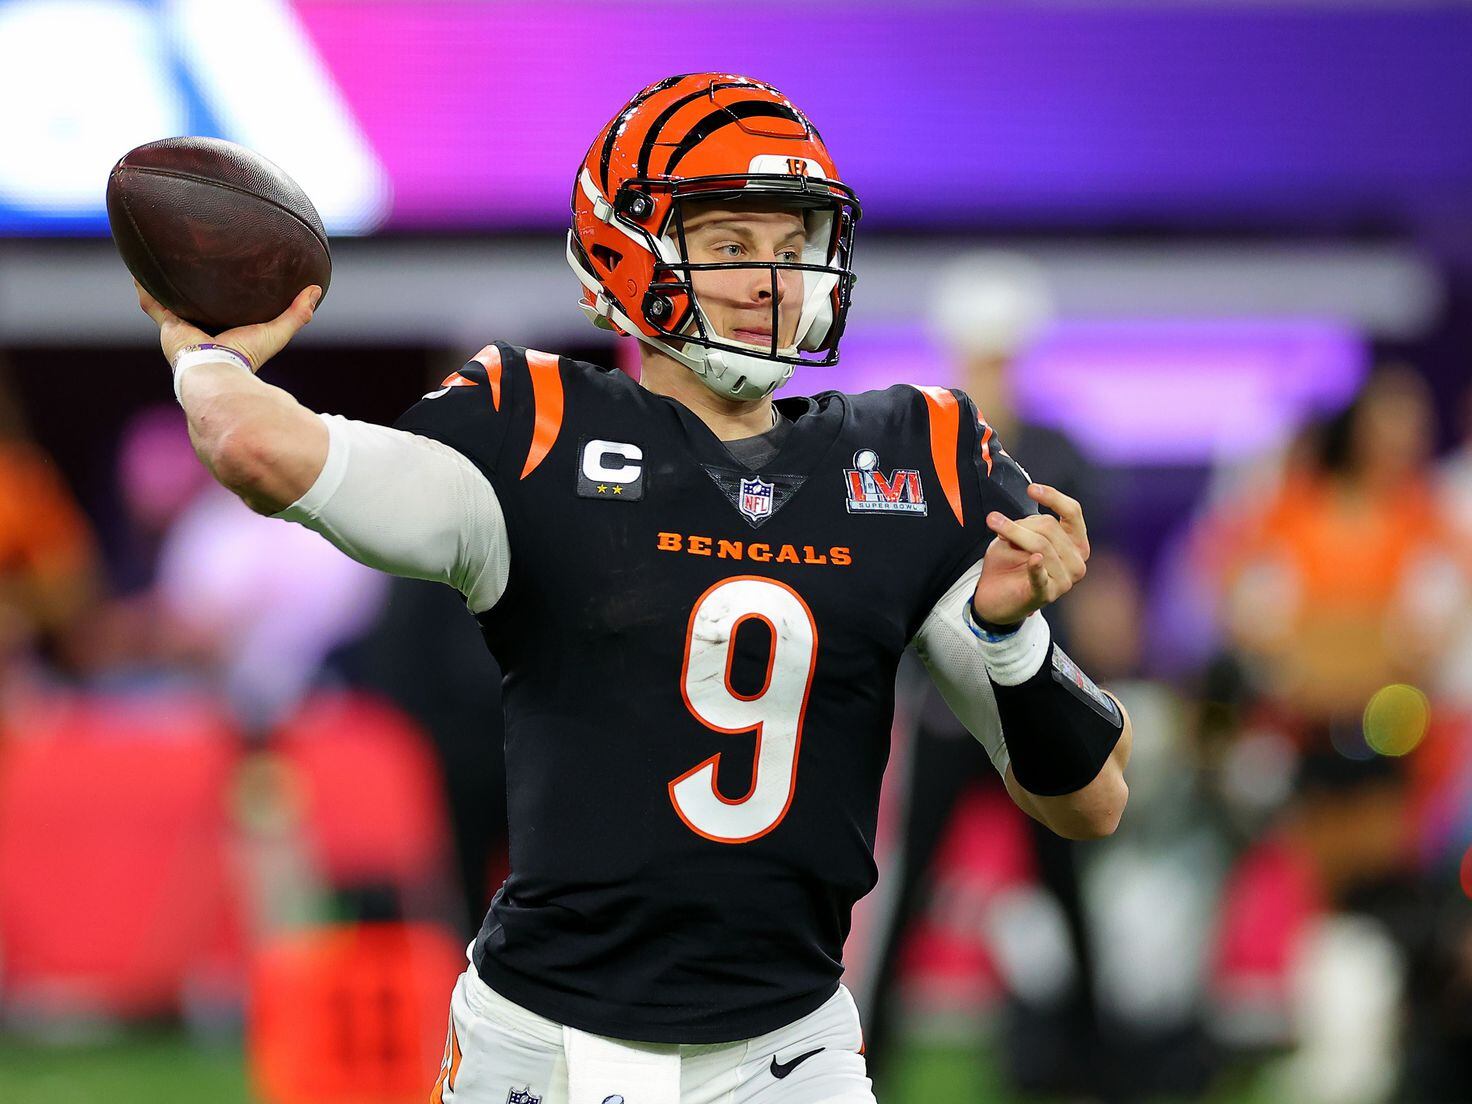 With a deal in the works, Cincinnati Bengals QB Joe Burrow says new  contract 'gets done when it gets done'